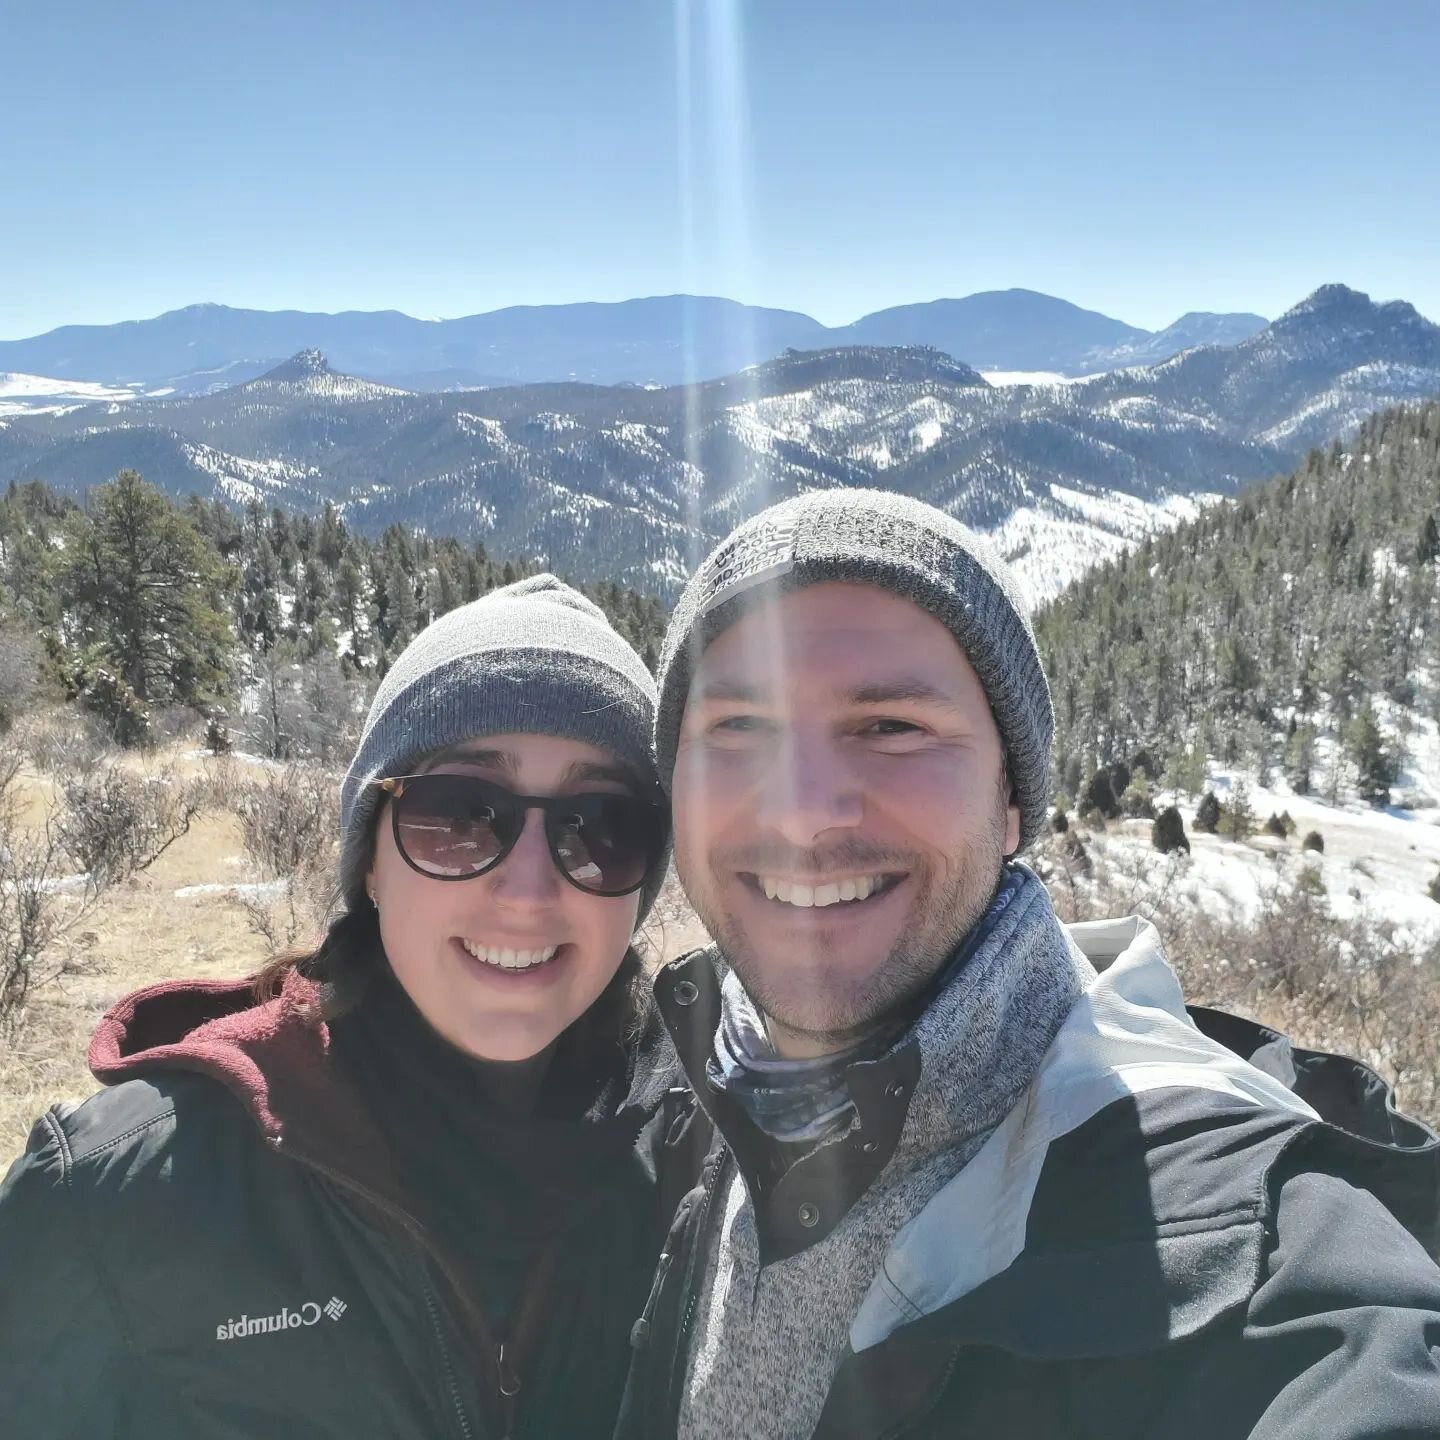 Snow hike and brewery shenanigans.
Because it's a Saturday in Colorado. What else would we do?